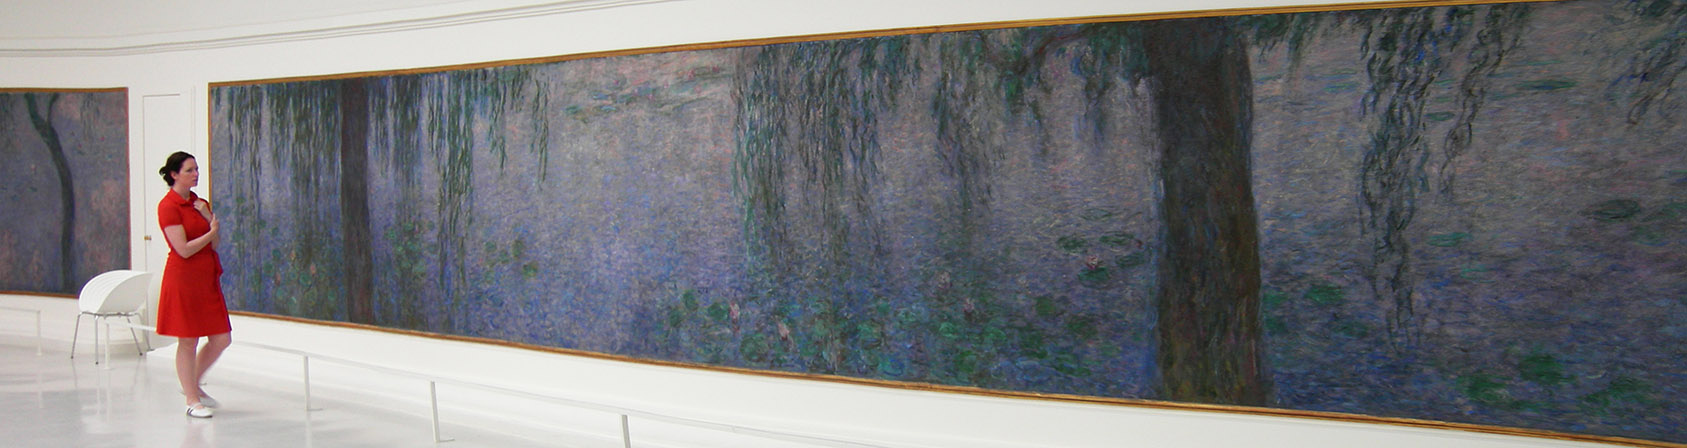 Orangerie_Pan_Footsteps_of_the_Impressioists